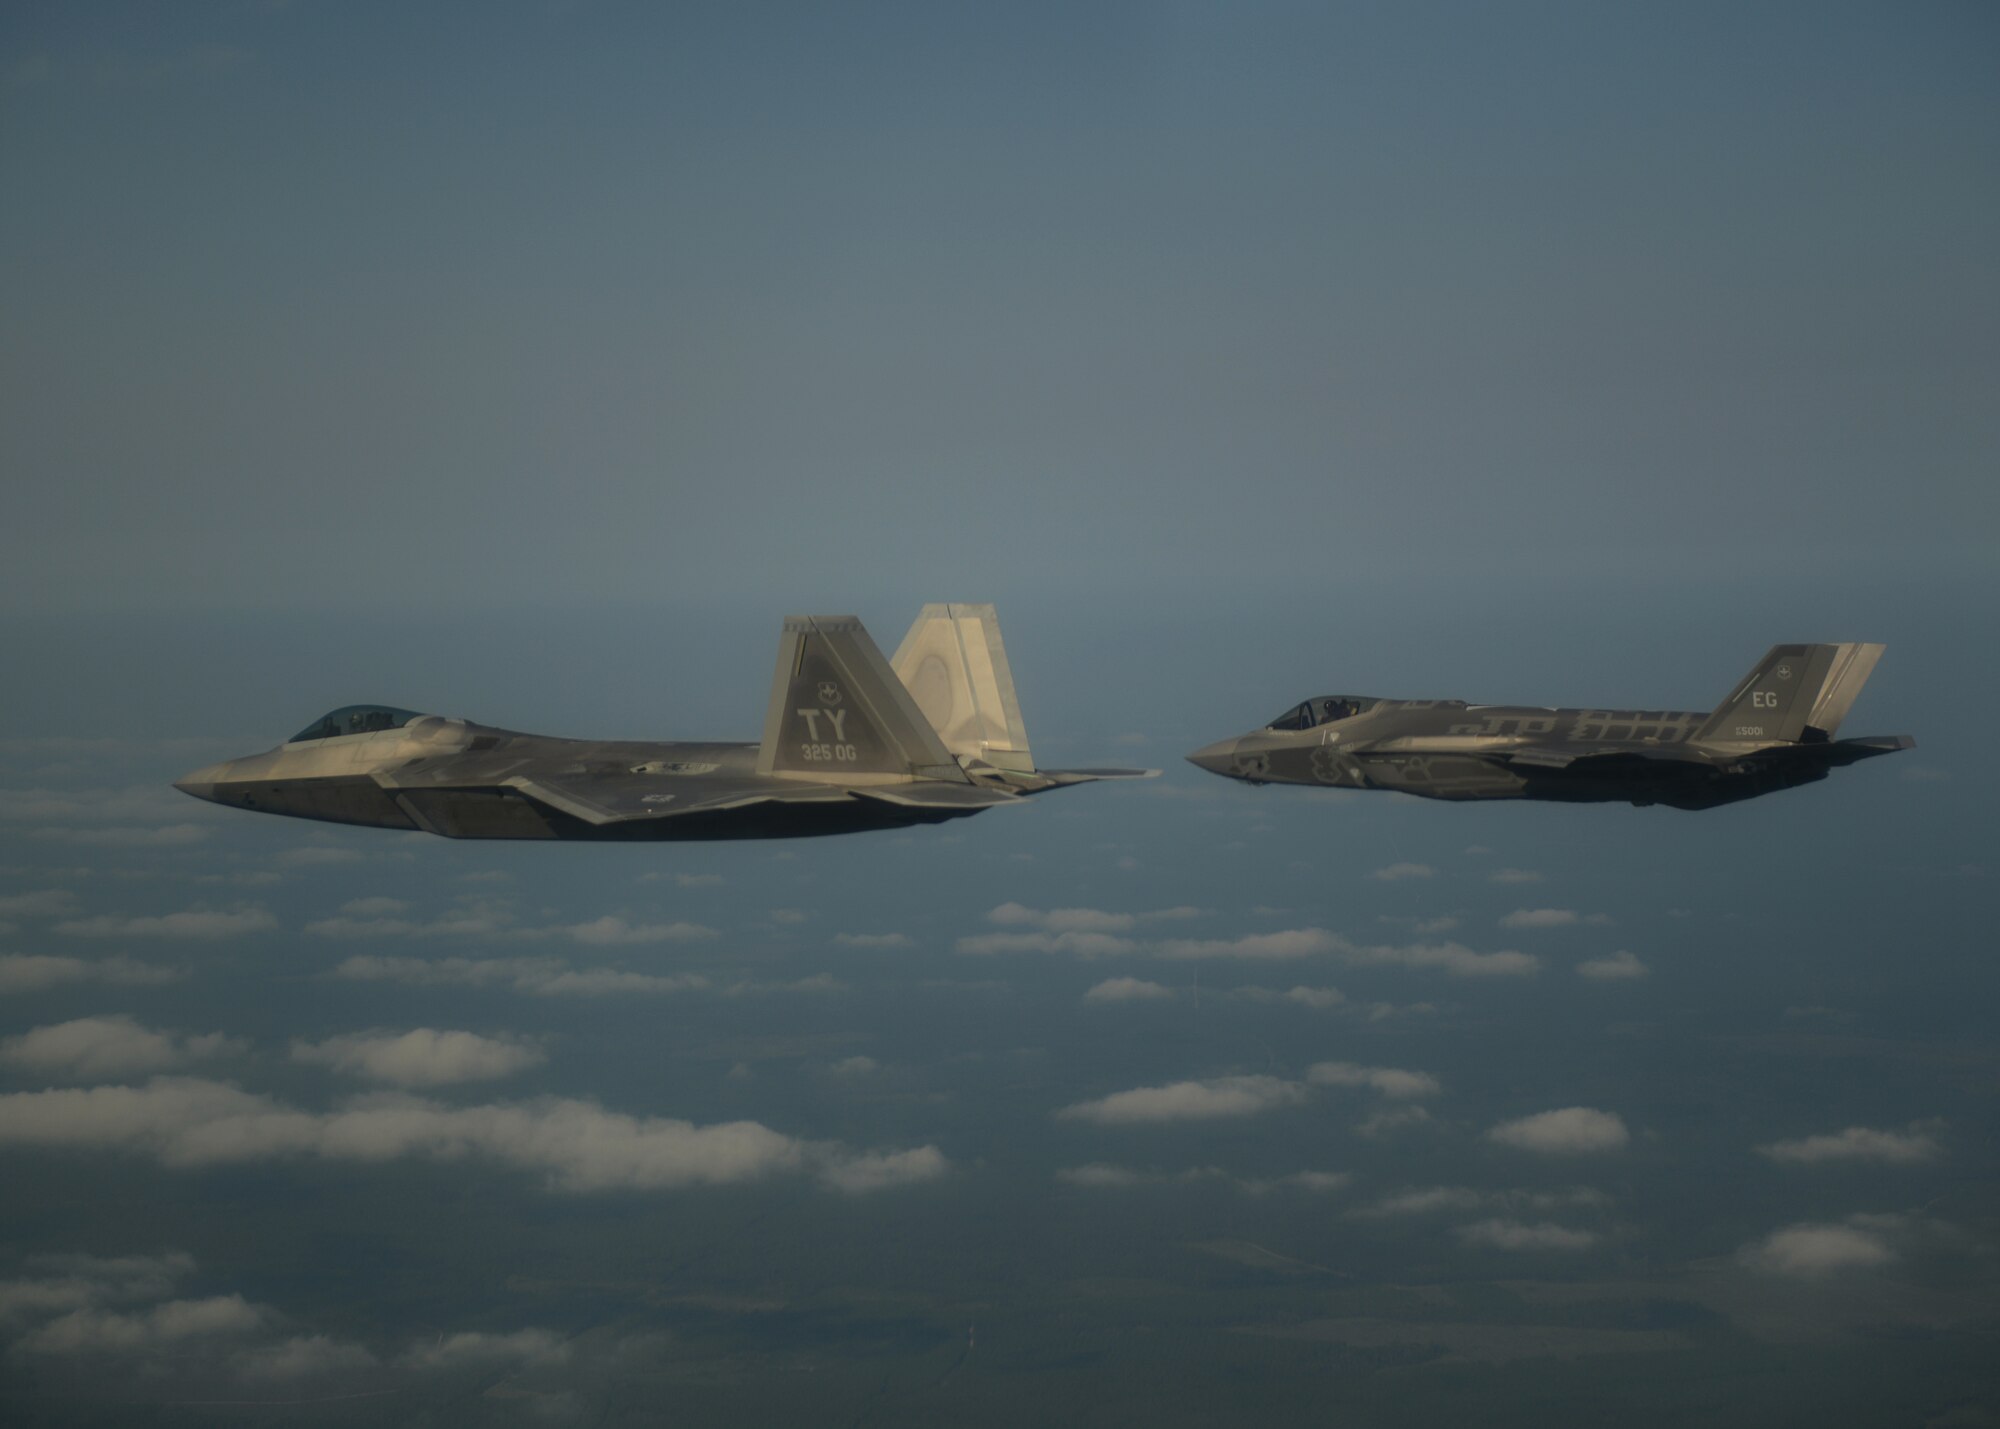 An F-22A Raptor, left, from the 43rd Fighter Squadron at Tyndall Air Force Base, Fla., and an F-35A Lightning II joint strike fighter from the 33rd Fighter Wing at Eglin Air Force Base, Fla., soar over the Emerald Coast Sept. 19, 2012. This was the first time the two fifth-generation fighters have flown together for the Air Force. (U.S. Air Force photo/Master Sgt. Jeremy T. Lock)